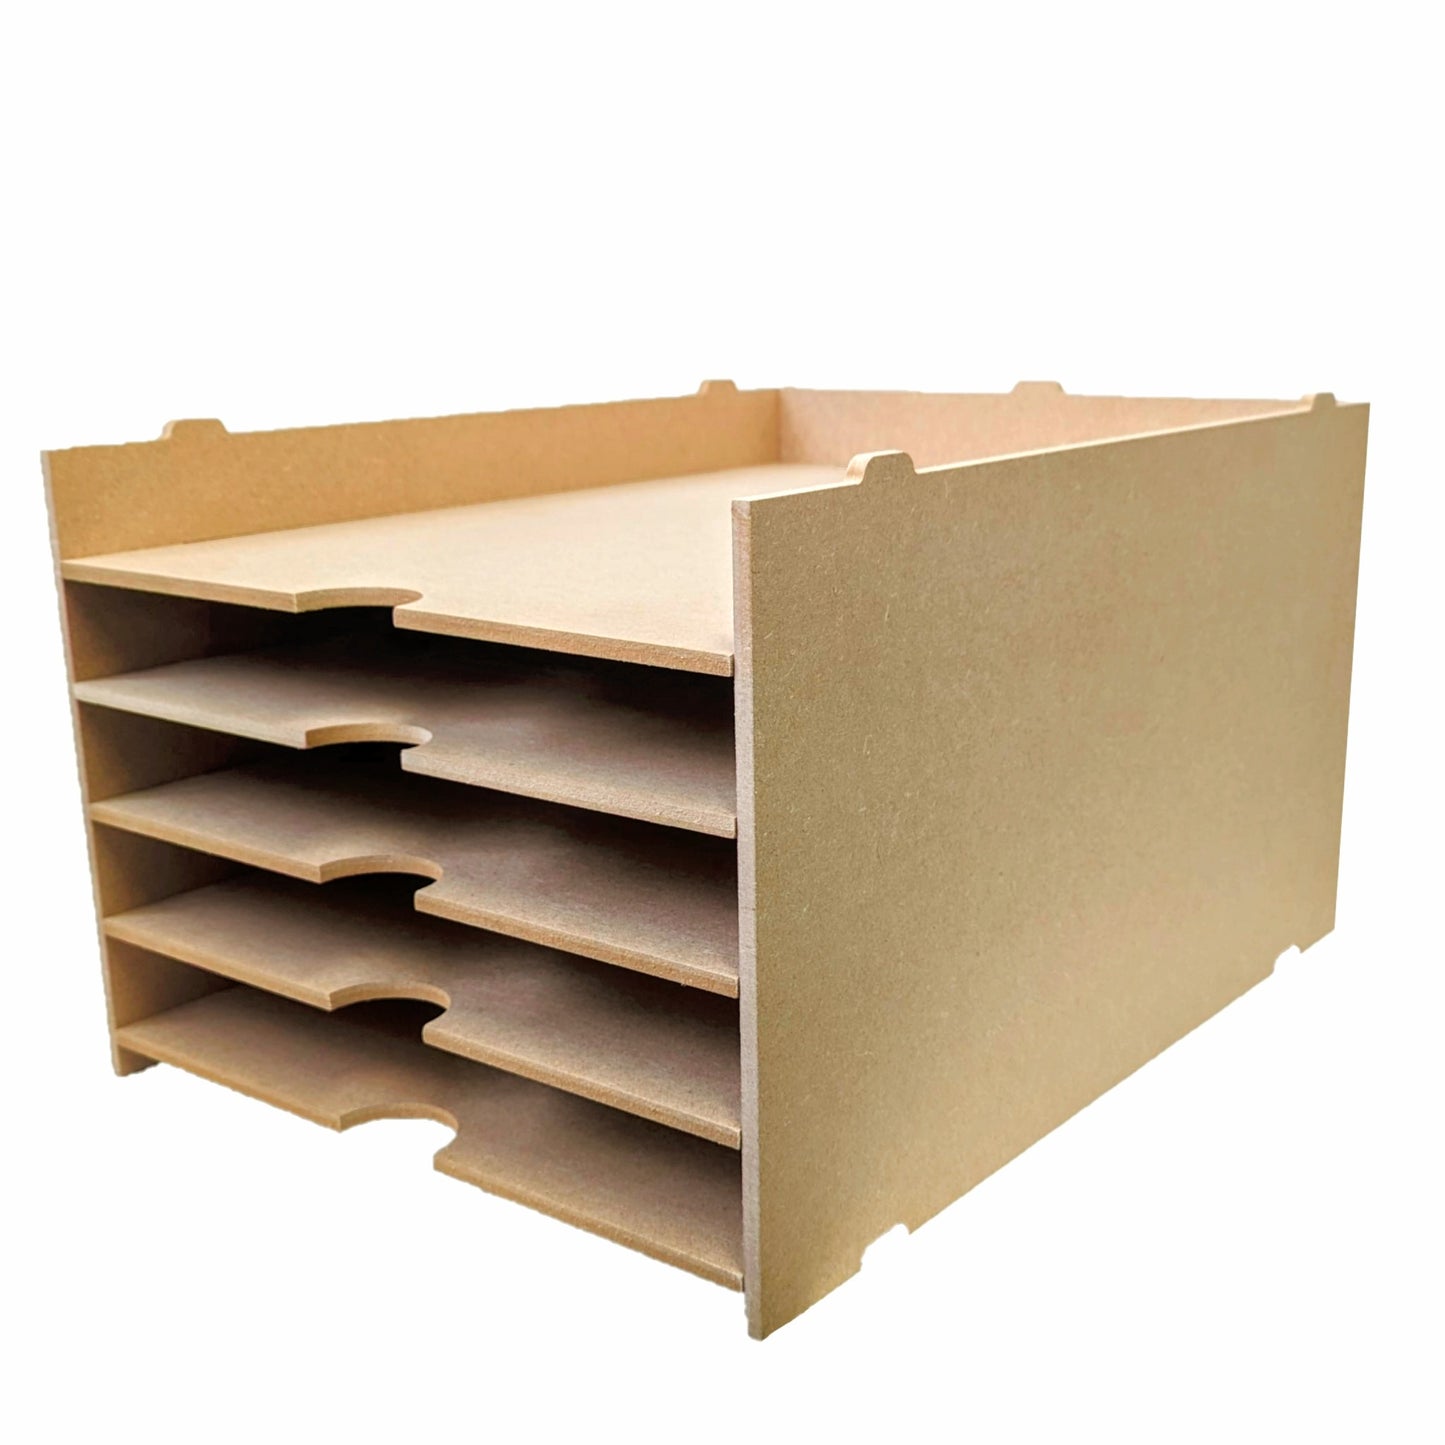 A3 Paper storage shelf, 5 shelves with stackable design - SECONDS